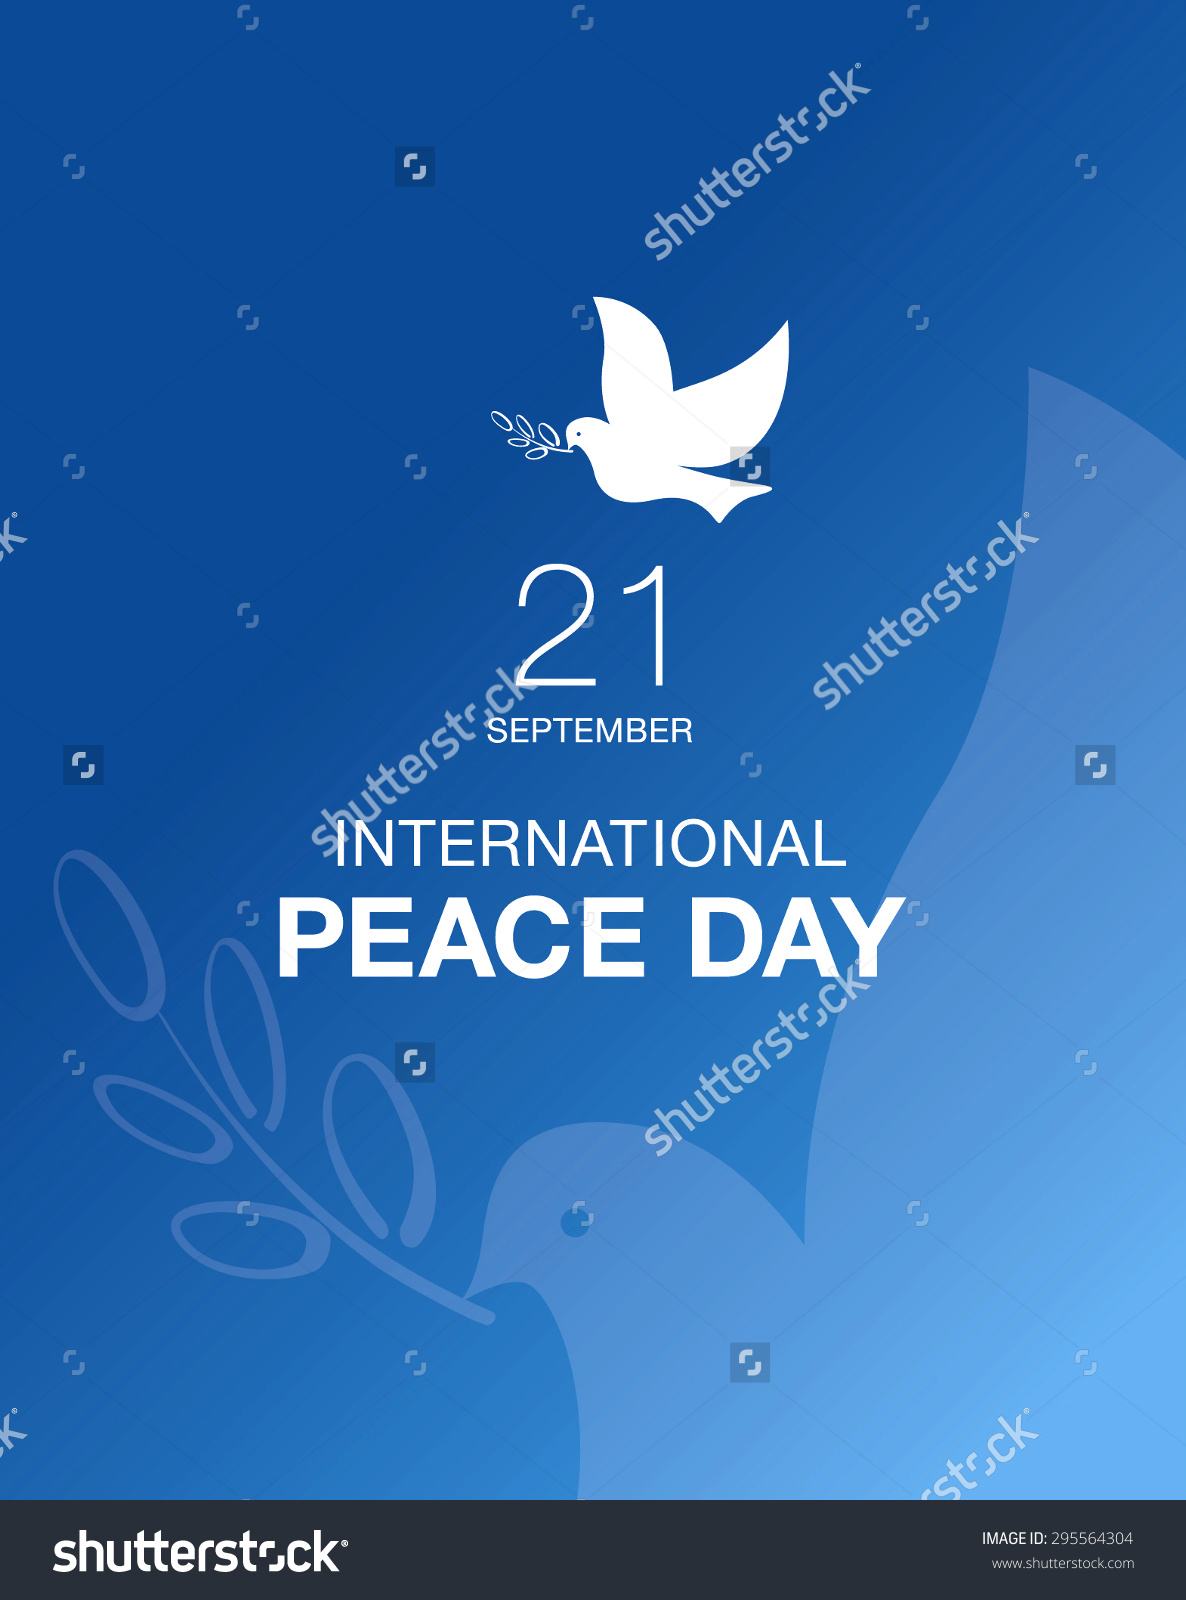 International Peace Day Wishes With Dome And Olive Branch Card